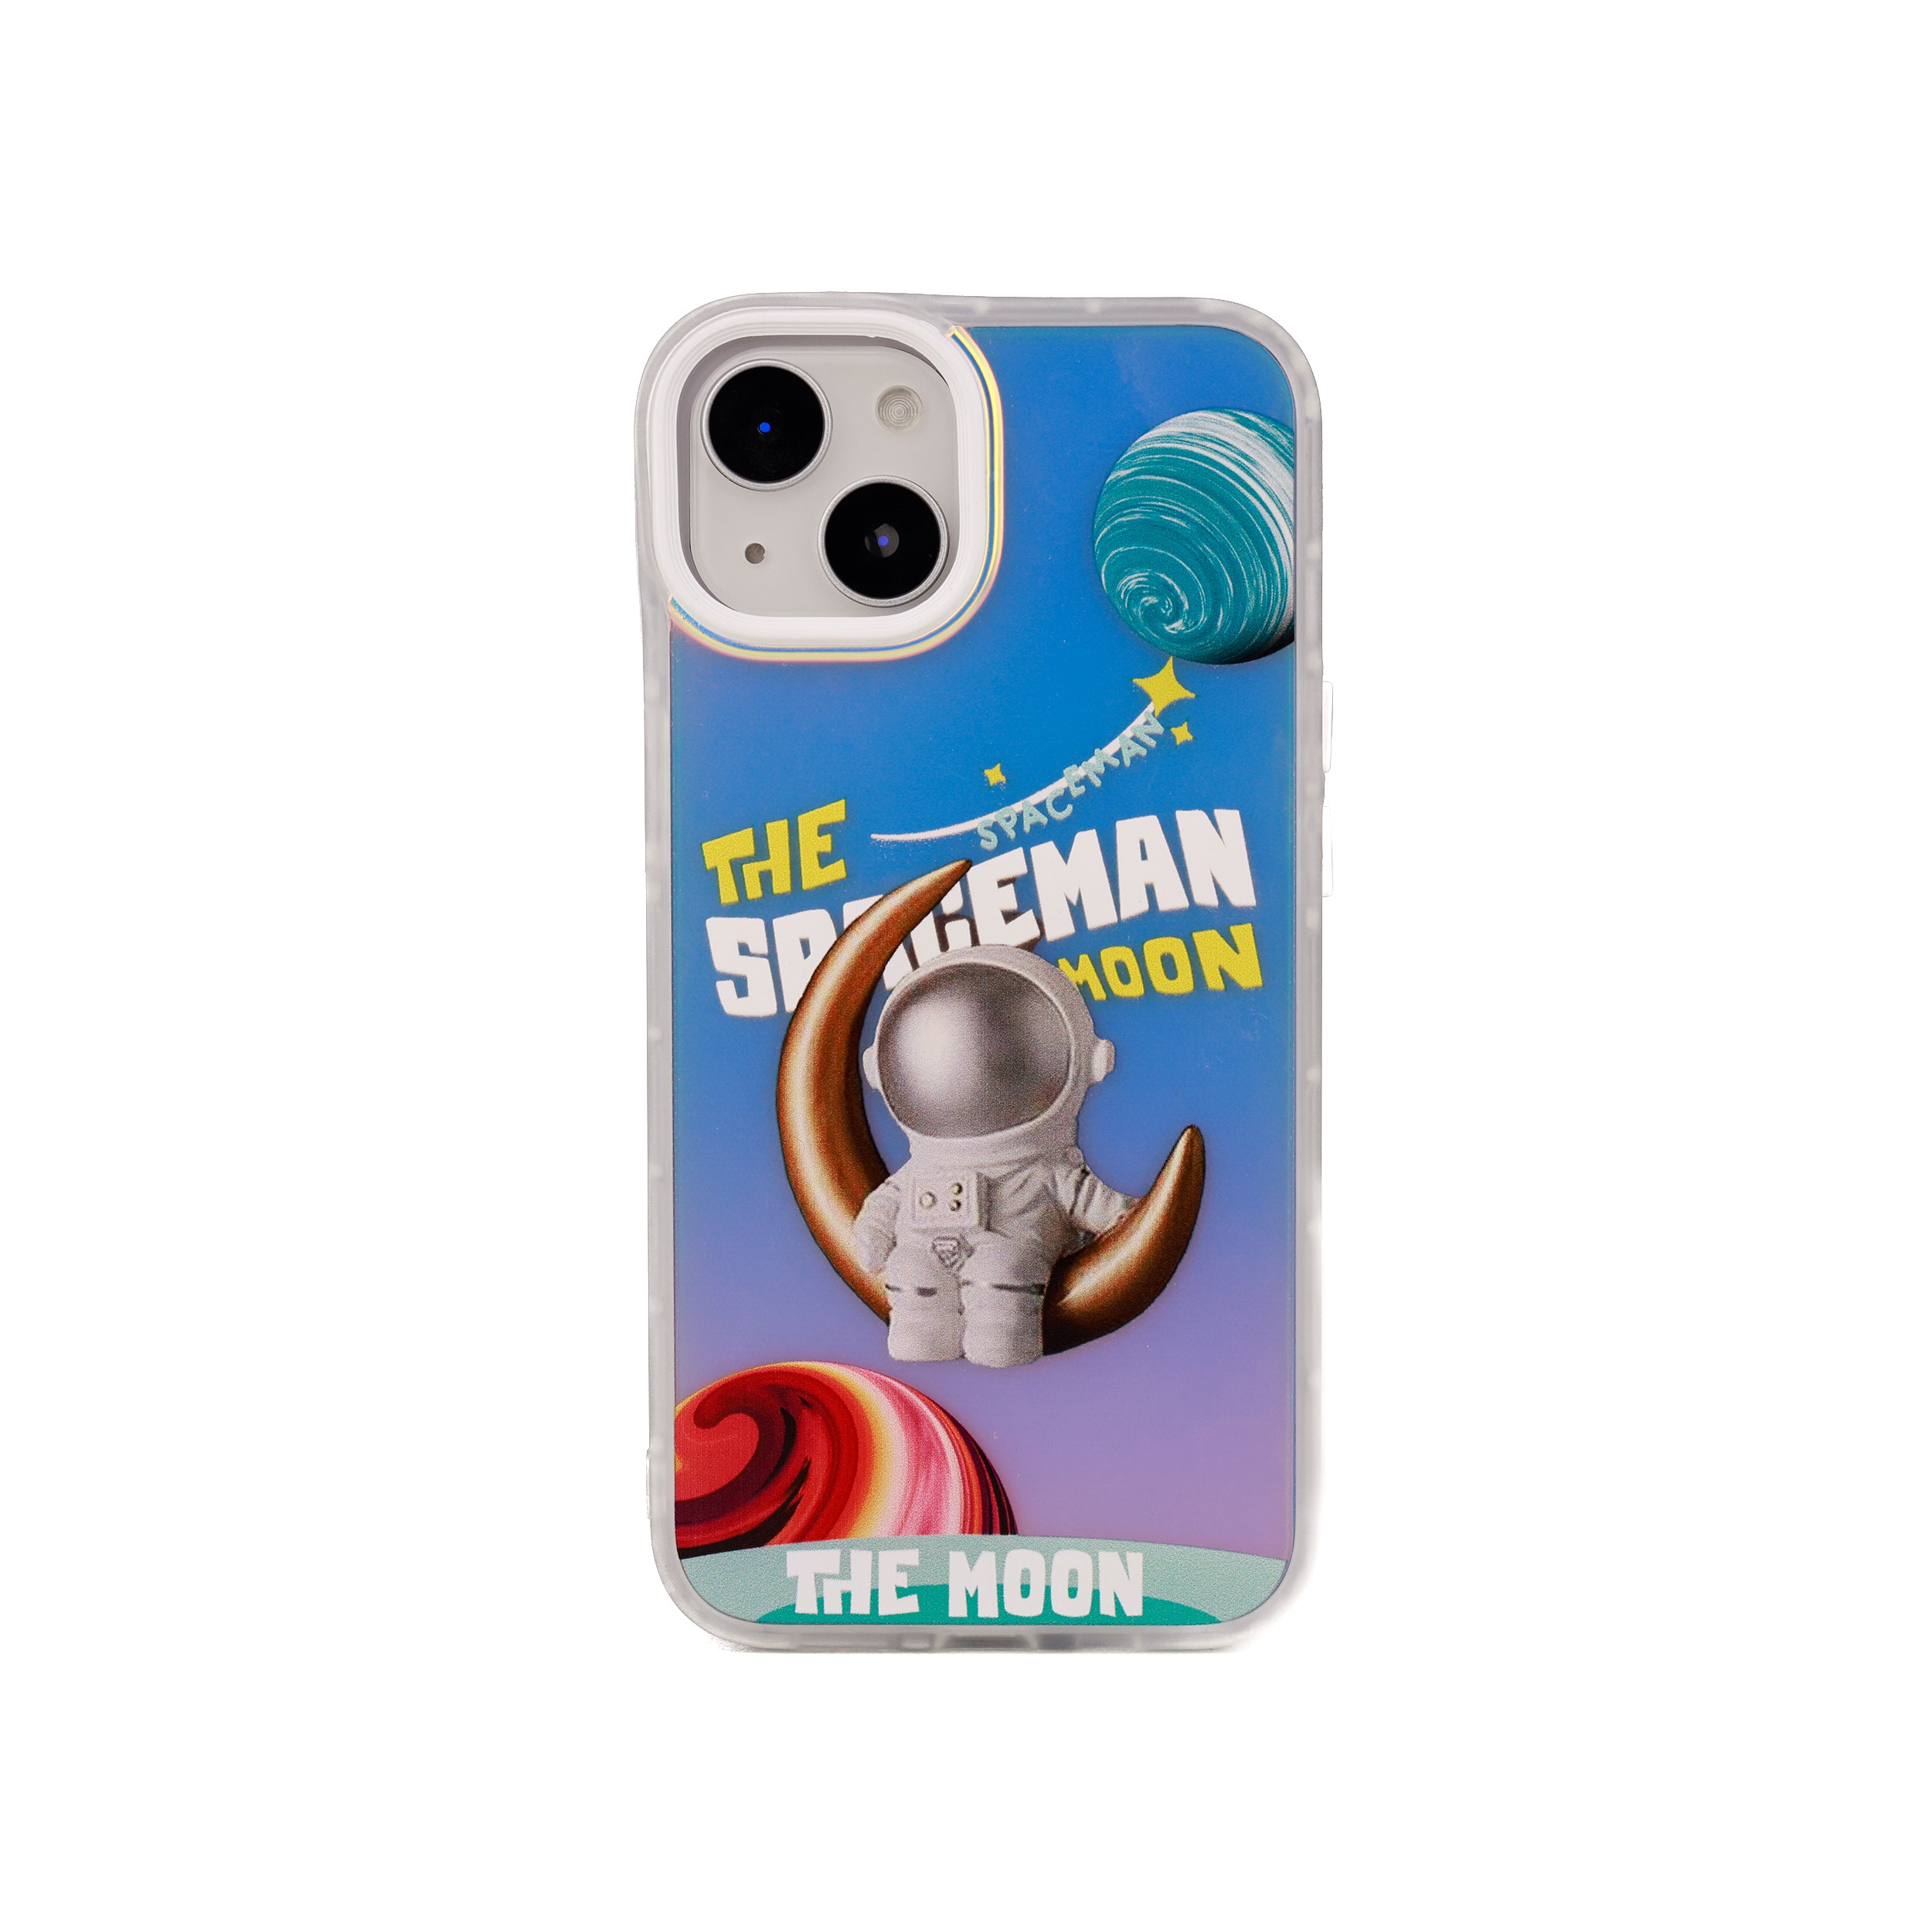 Spaceman iPhone Case